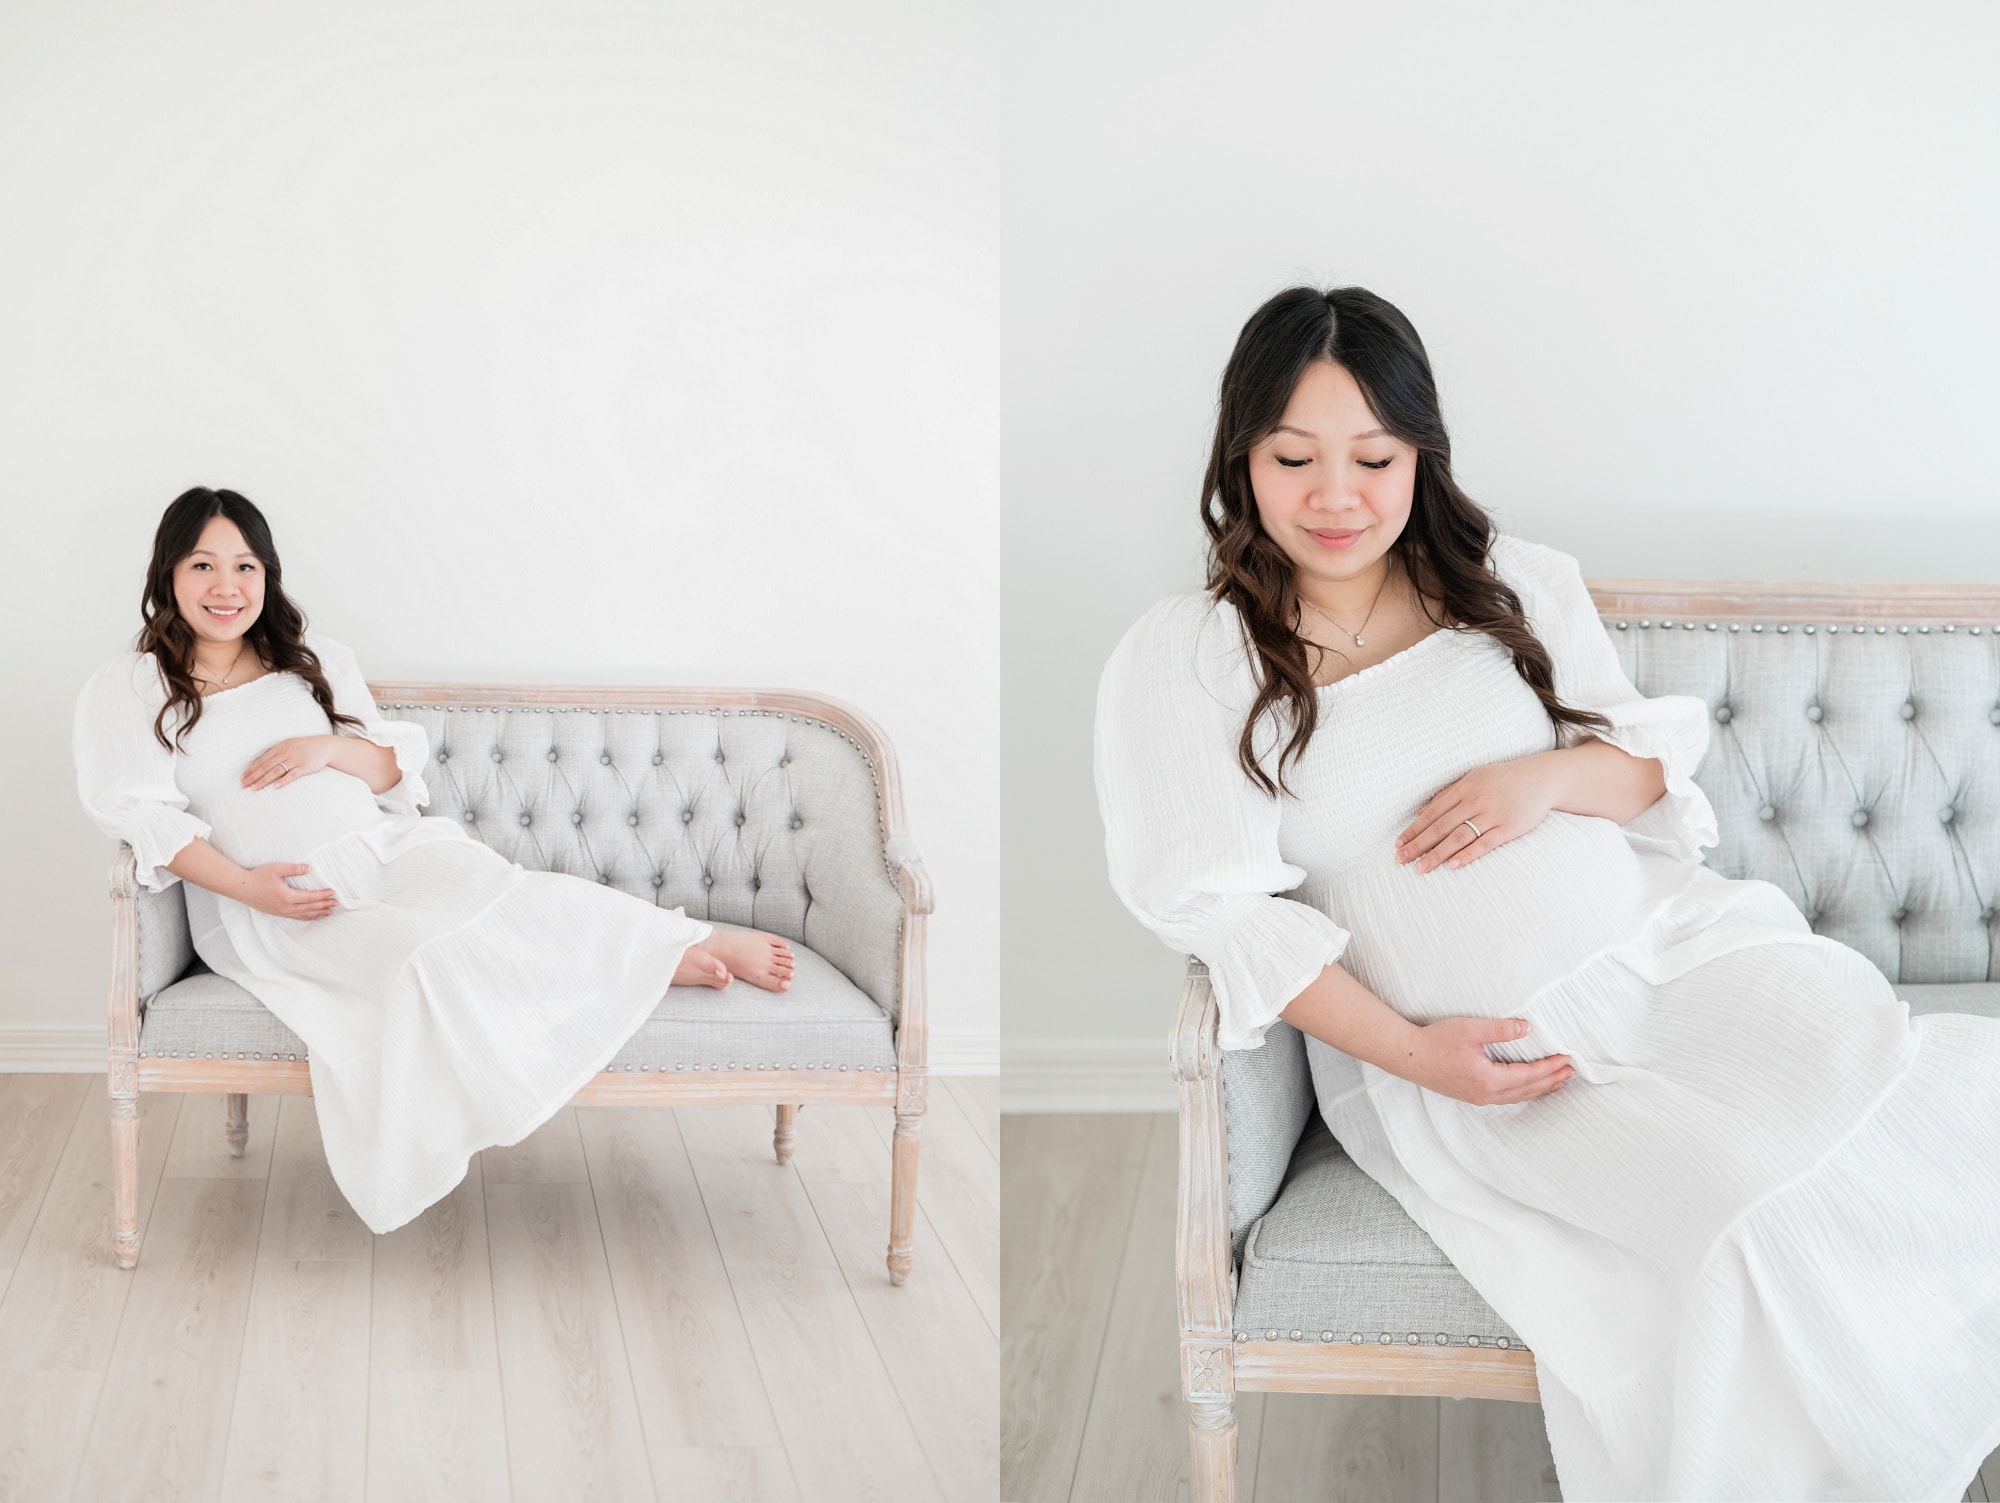 Maternity pictures on settee